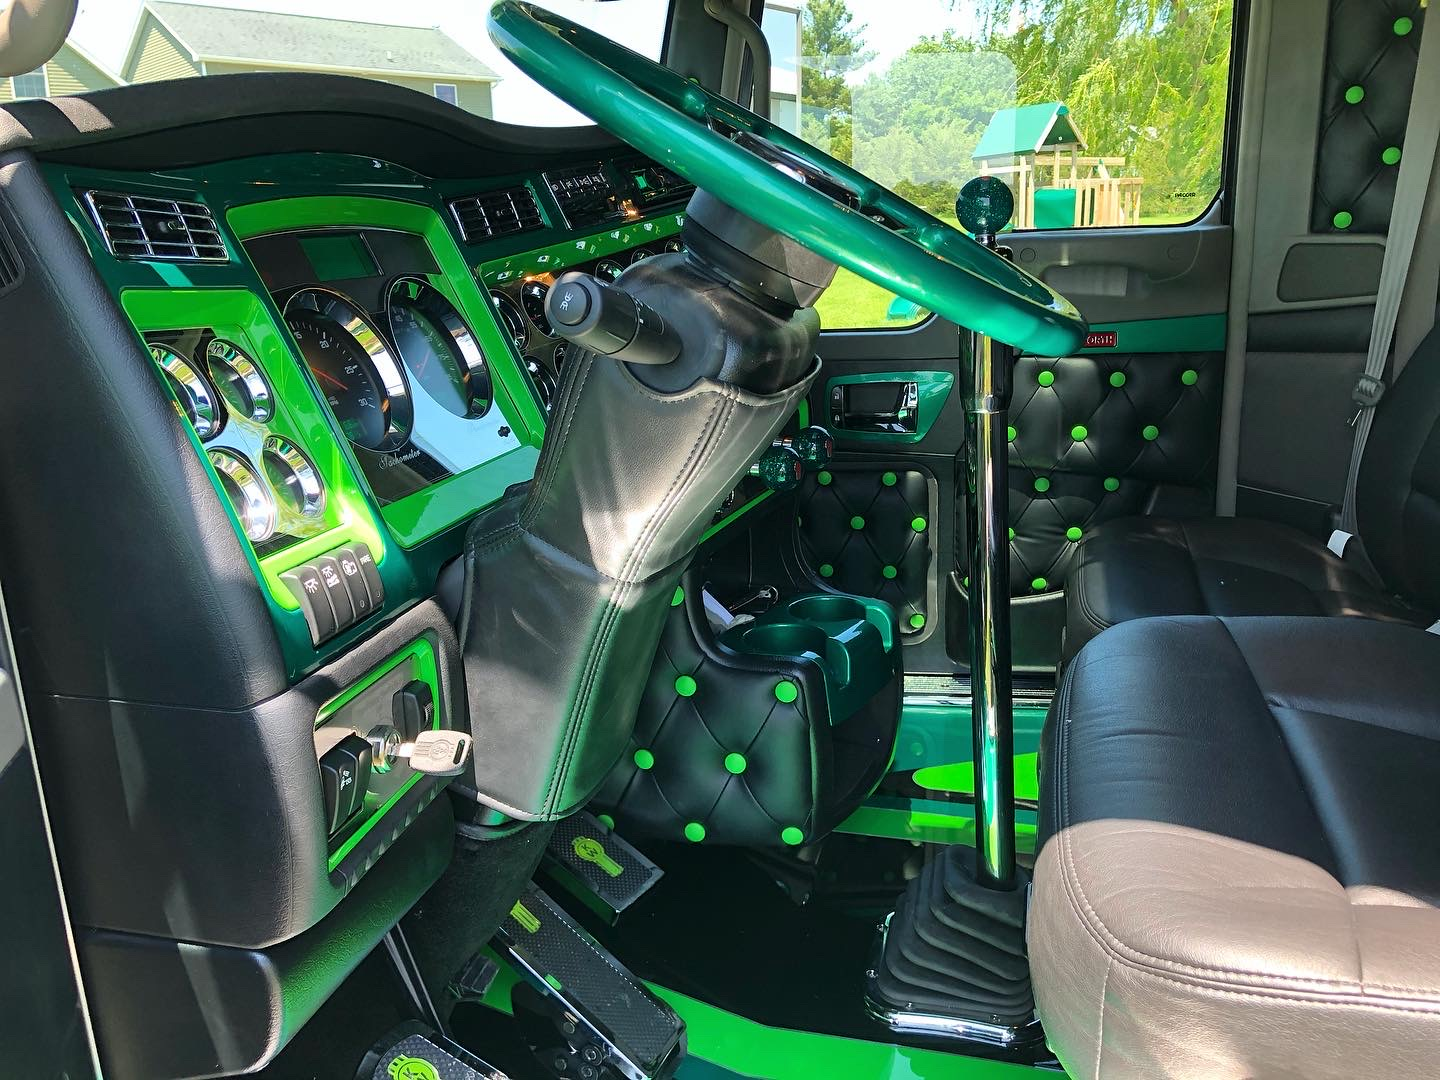 Inside view of truck decked out with green accented interior